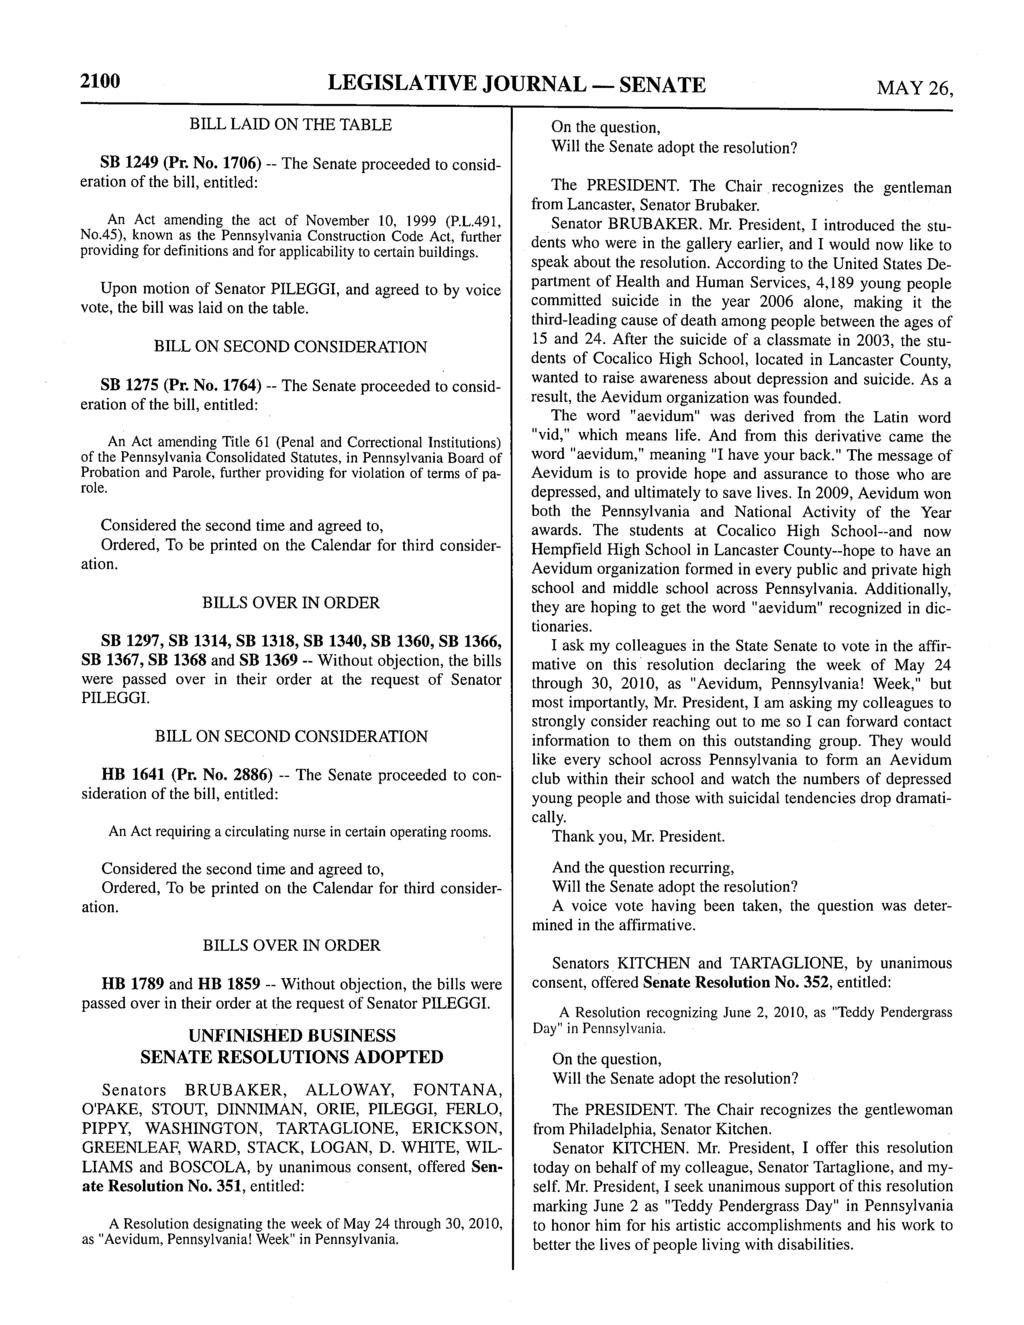 2100 LEGISLATIVE JOURNAL - SENATE MAY 26, BILL LAID ON THE TABLE SB 1249 (Pr. No. 1706) -- The Senate proceeded to consideration An Act amending the act of November 10, 1999 (P.L.491, No.